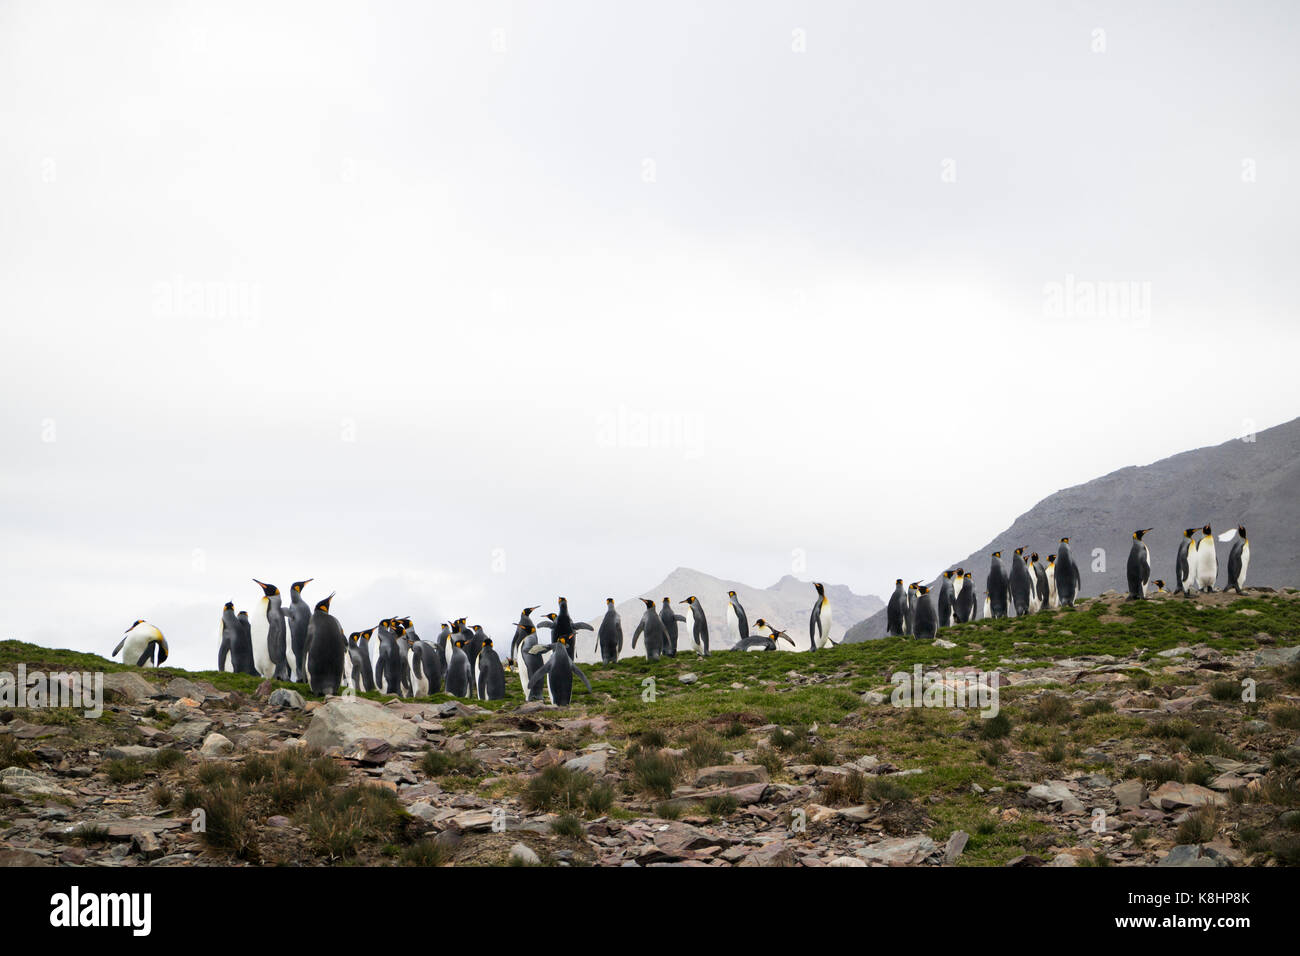 Colony of king penguins on mountains against clear sky Stock Photo